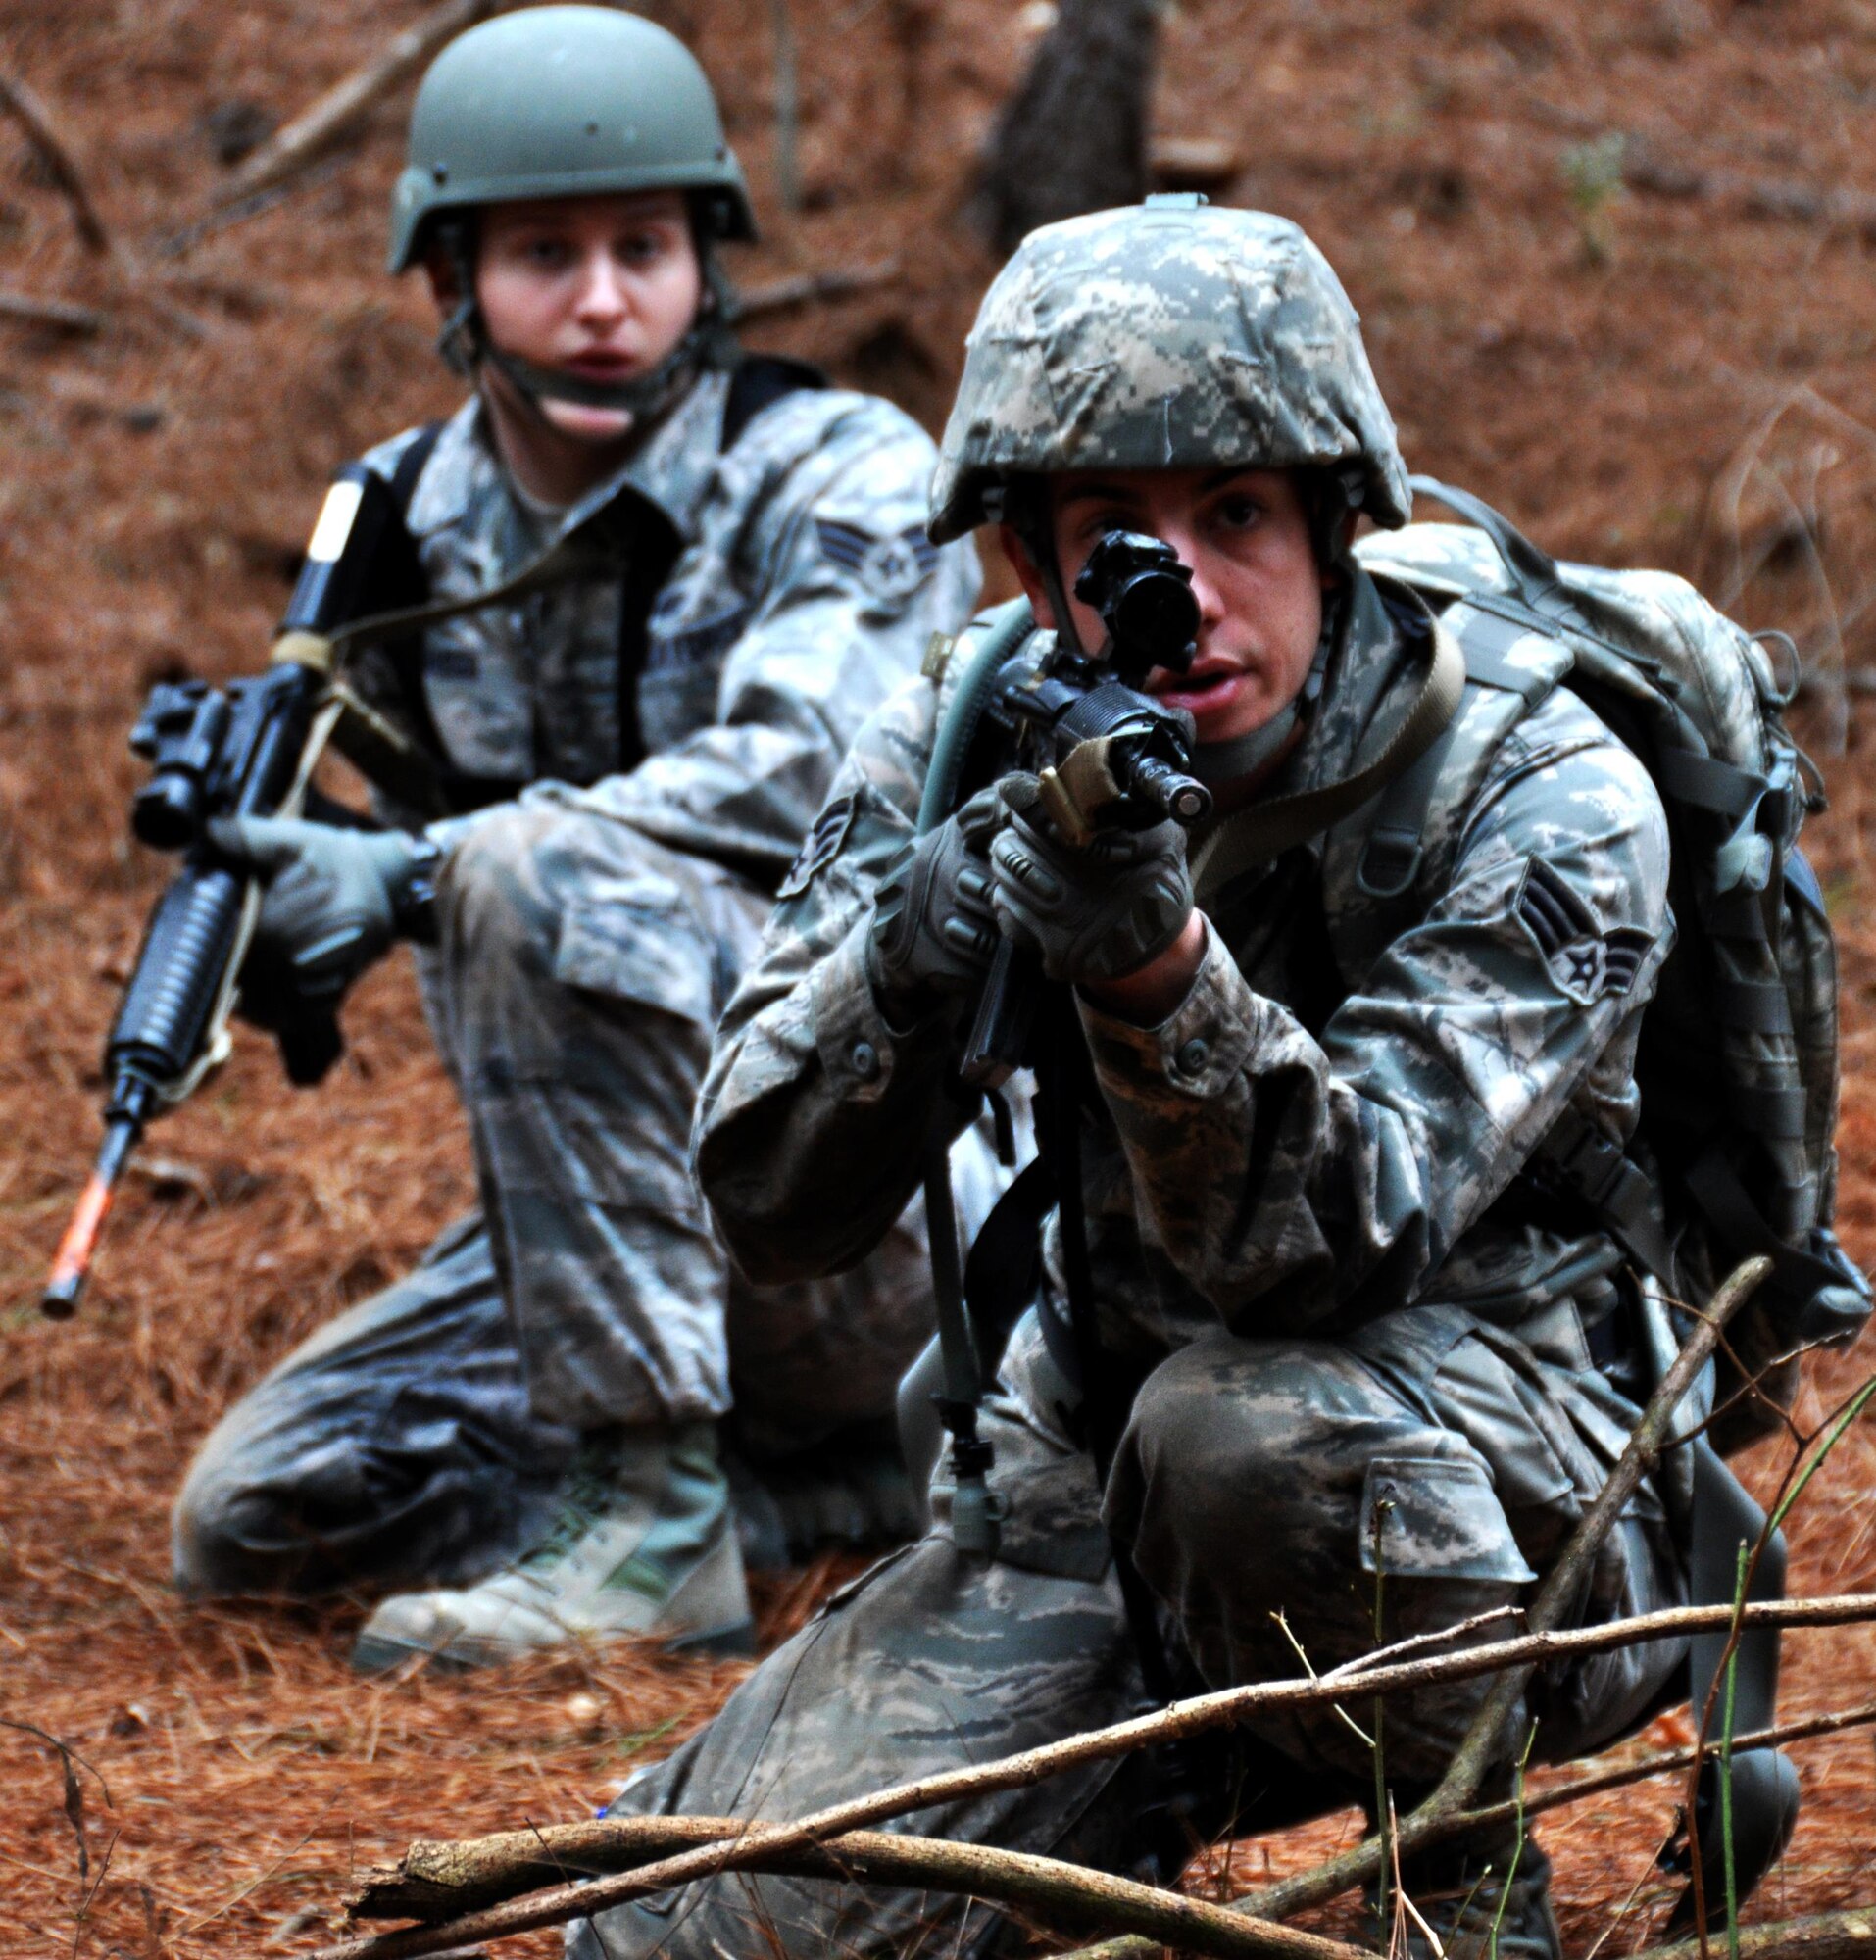 Senior Airmen Tyler Wright and Dominic Maggs, 911th Force Support Squadron, Pittsburgh, Pa., scout out for the enemy to recover a casualty dummy during OPERATION Everybody Panic as part of Force Support Silver Flag at Dobbins Air Reserve Base, Ga., March 10, 2015. Teams were tasked with engaging targets, self-aid buddy care, providing care under fire, identifying unexploded ordnances and improvised explosive devices, describing and providing the location of the UXOs and IEDs on a grid, low and high crawling, and transporting remains during this scenario.  (U.S. Air Force photo/Senior Airman Daniel Phelps)